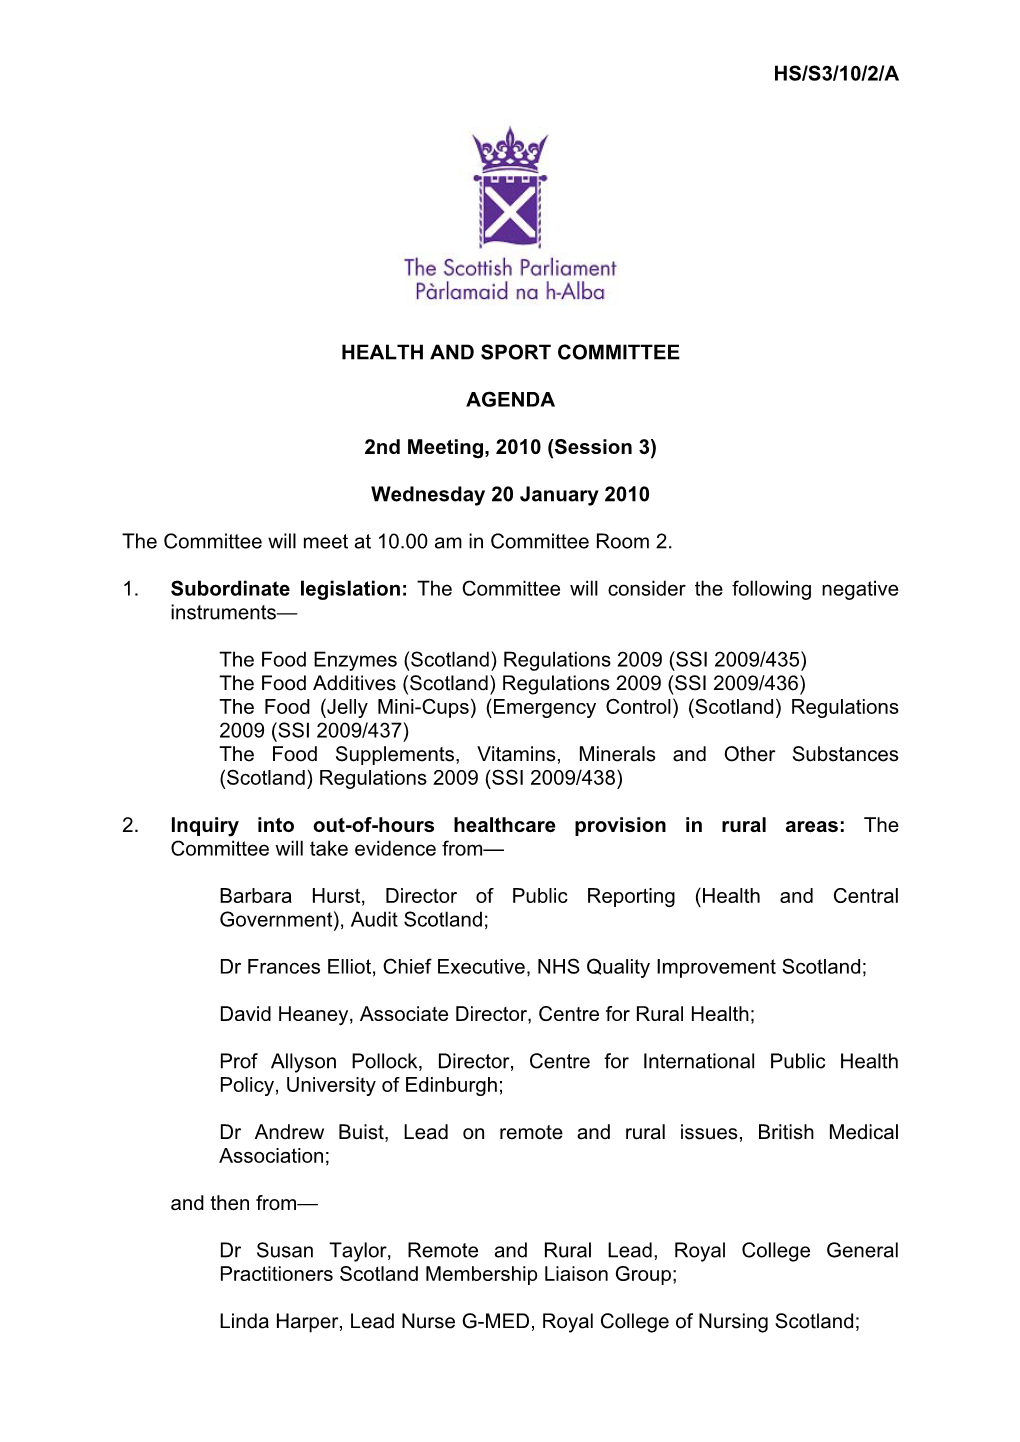 HS/S3/10/2/A HEALTH and SPORT COMMITTEE AGENDA 2Nd